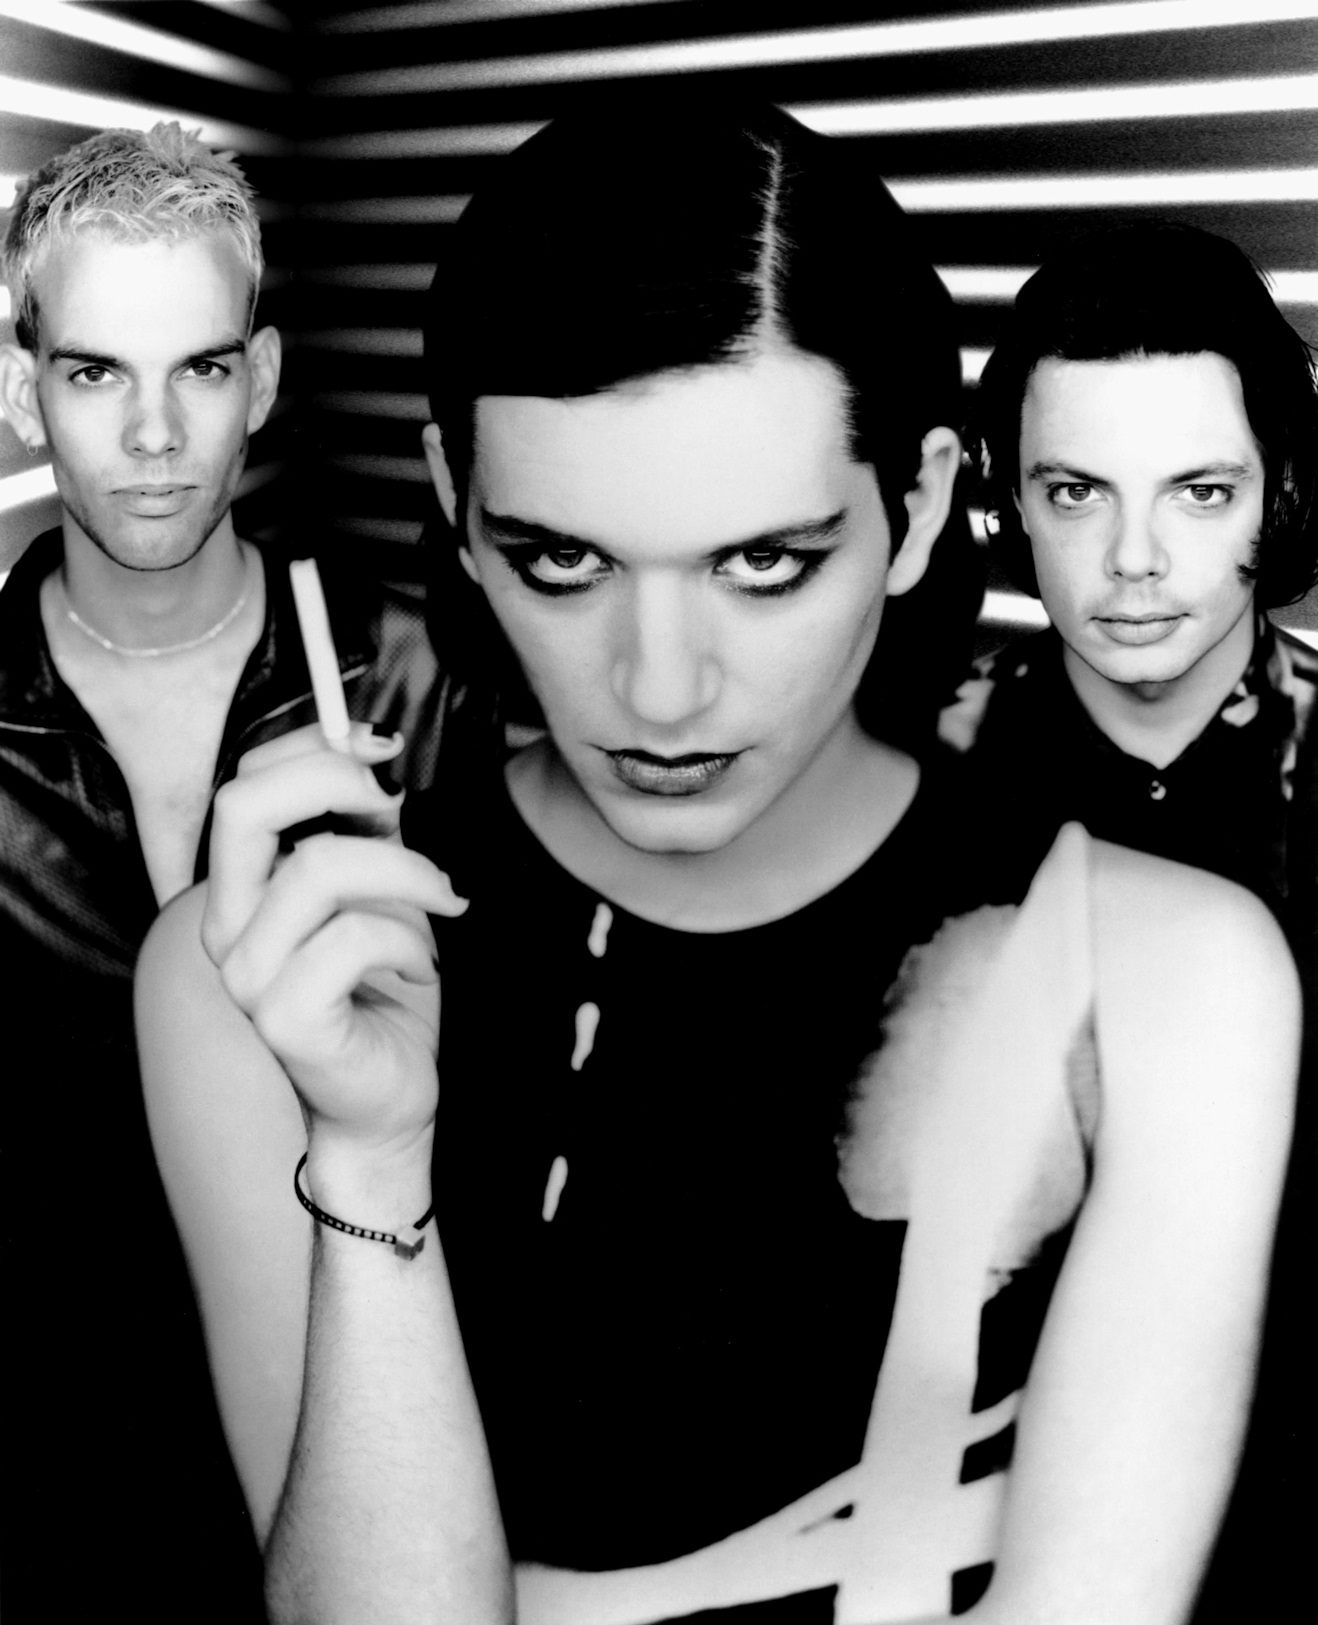 Placebo - Requiem For A Jerk 